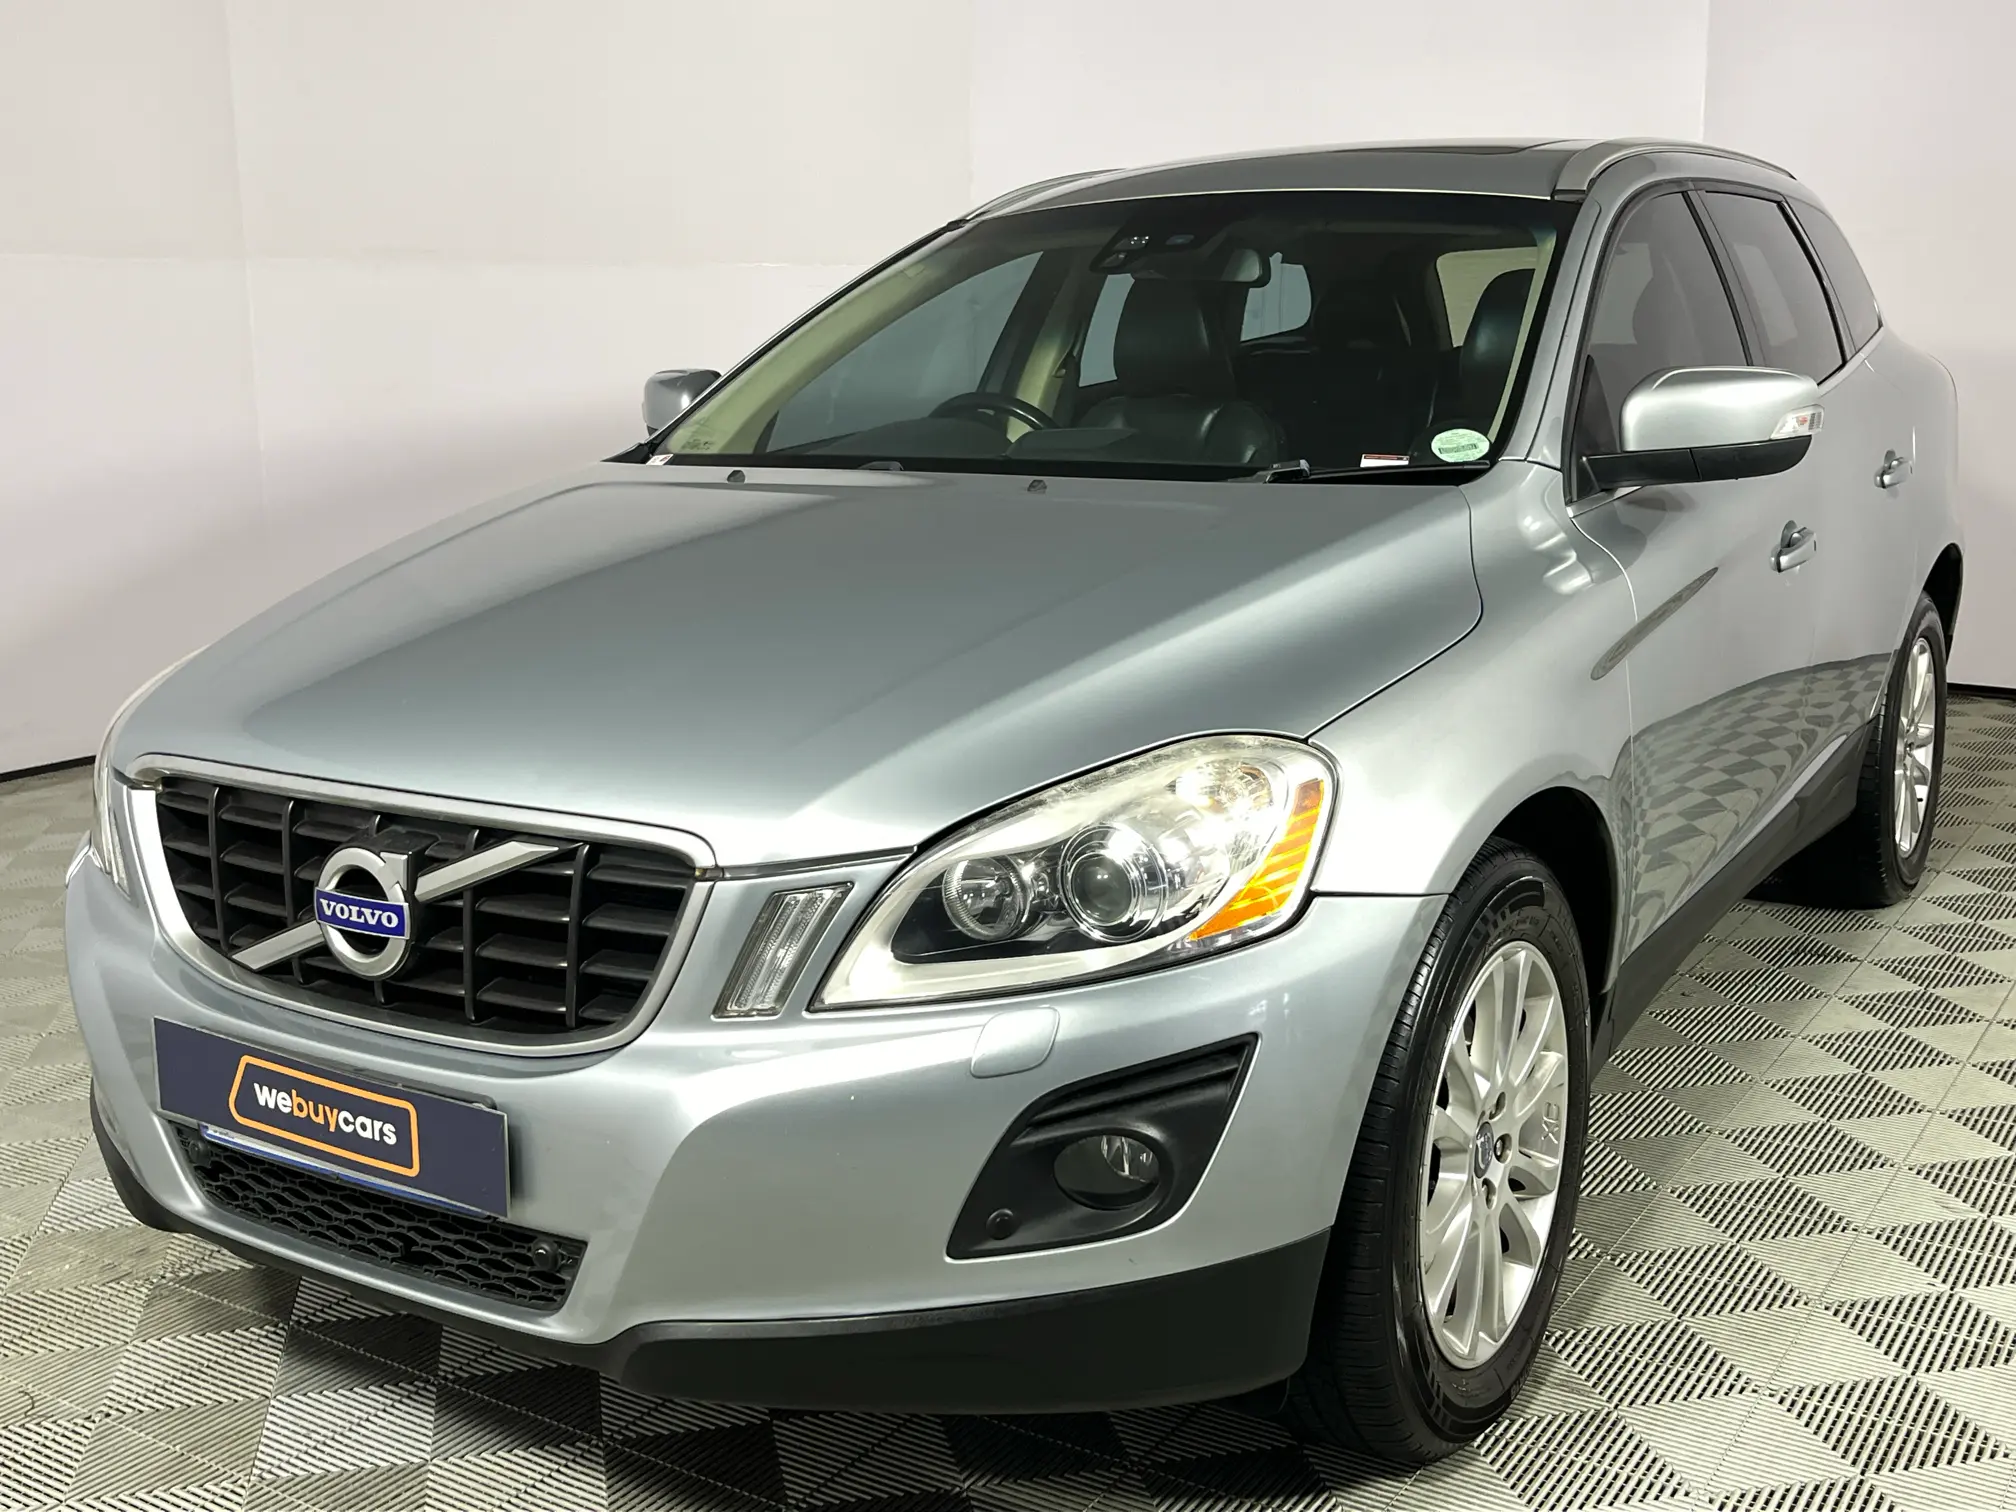 2009 Volvo Xc60 3.0T Geartronic